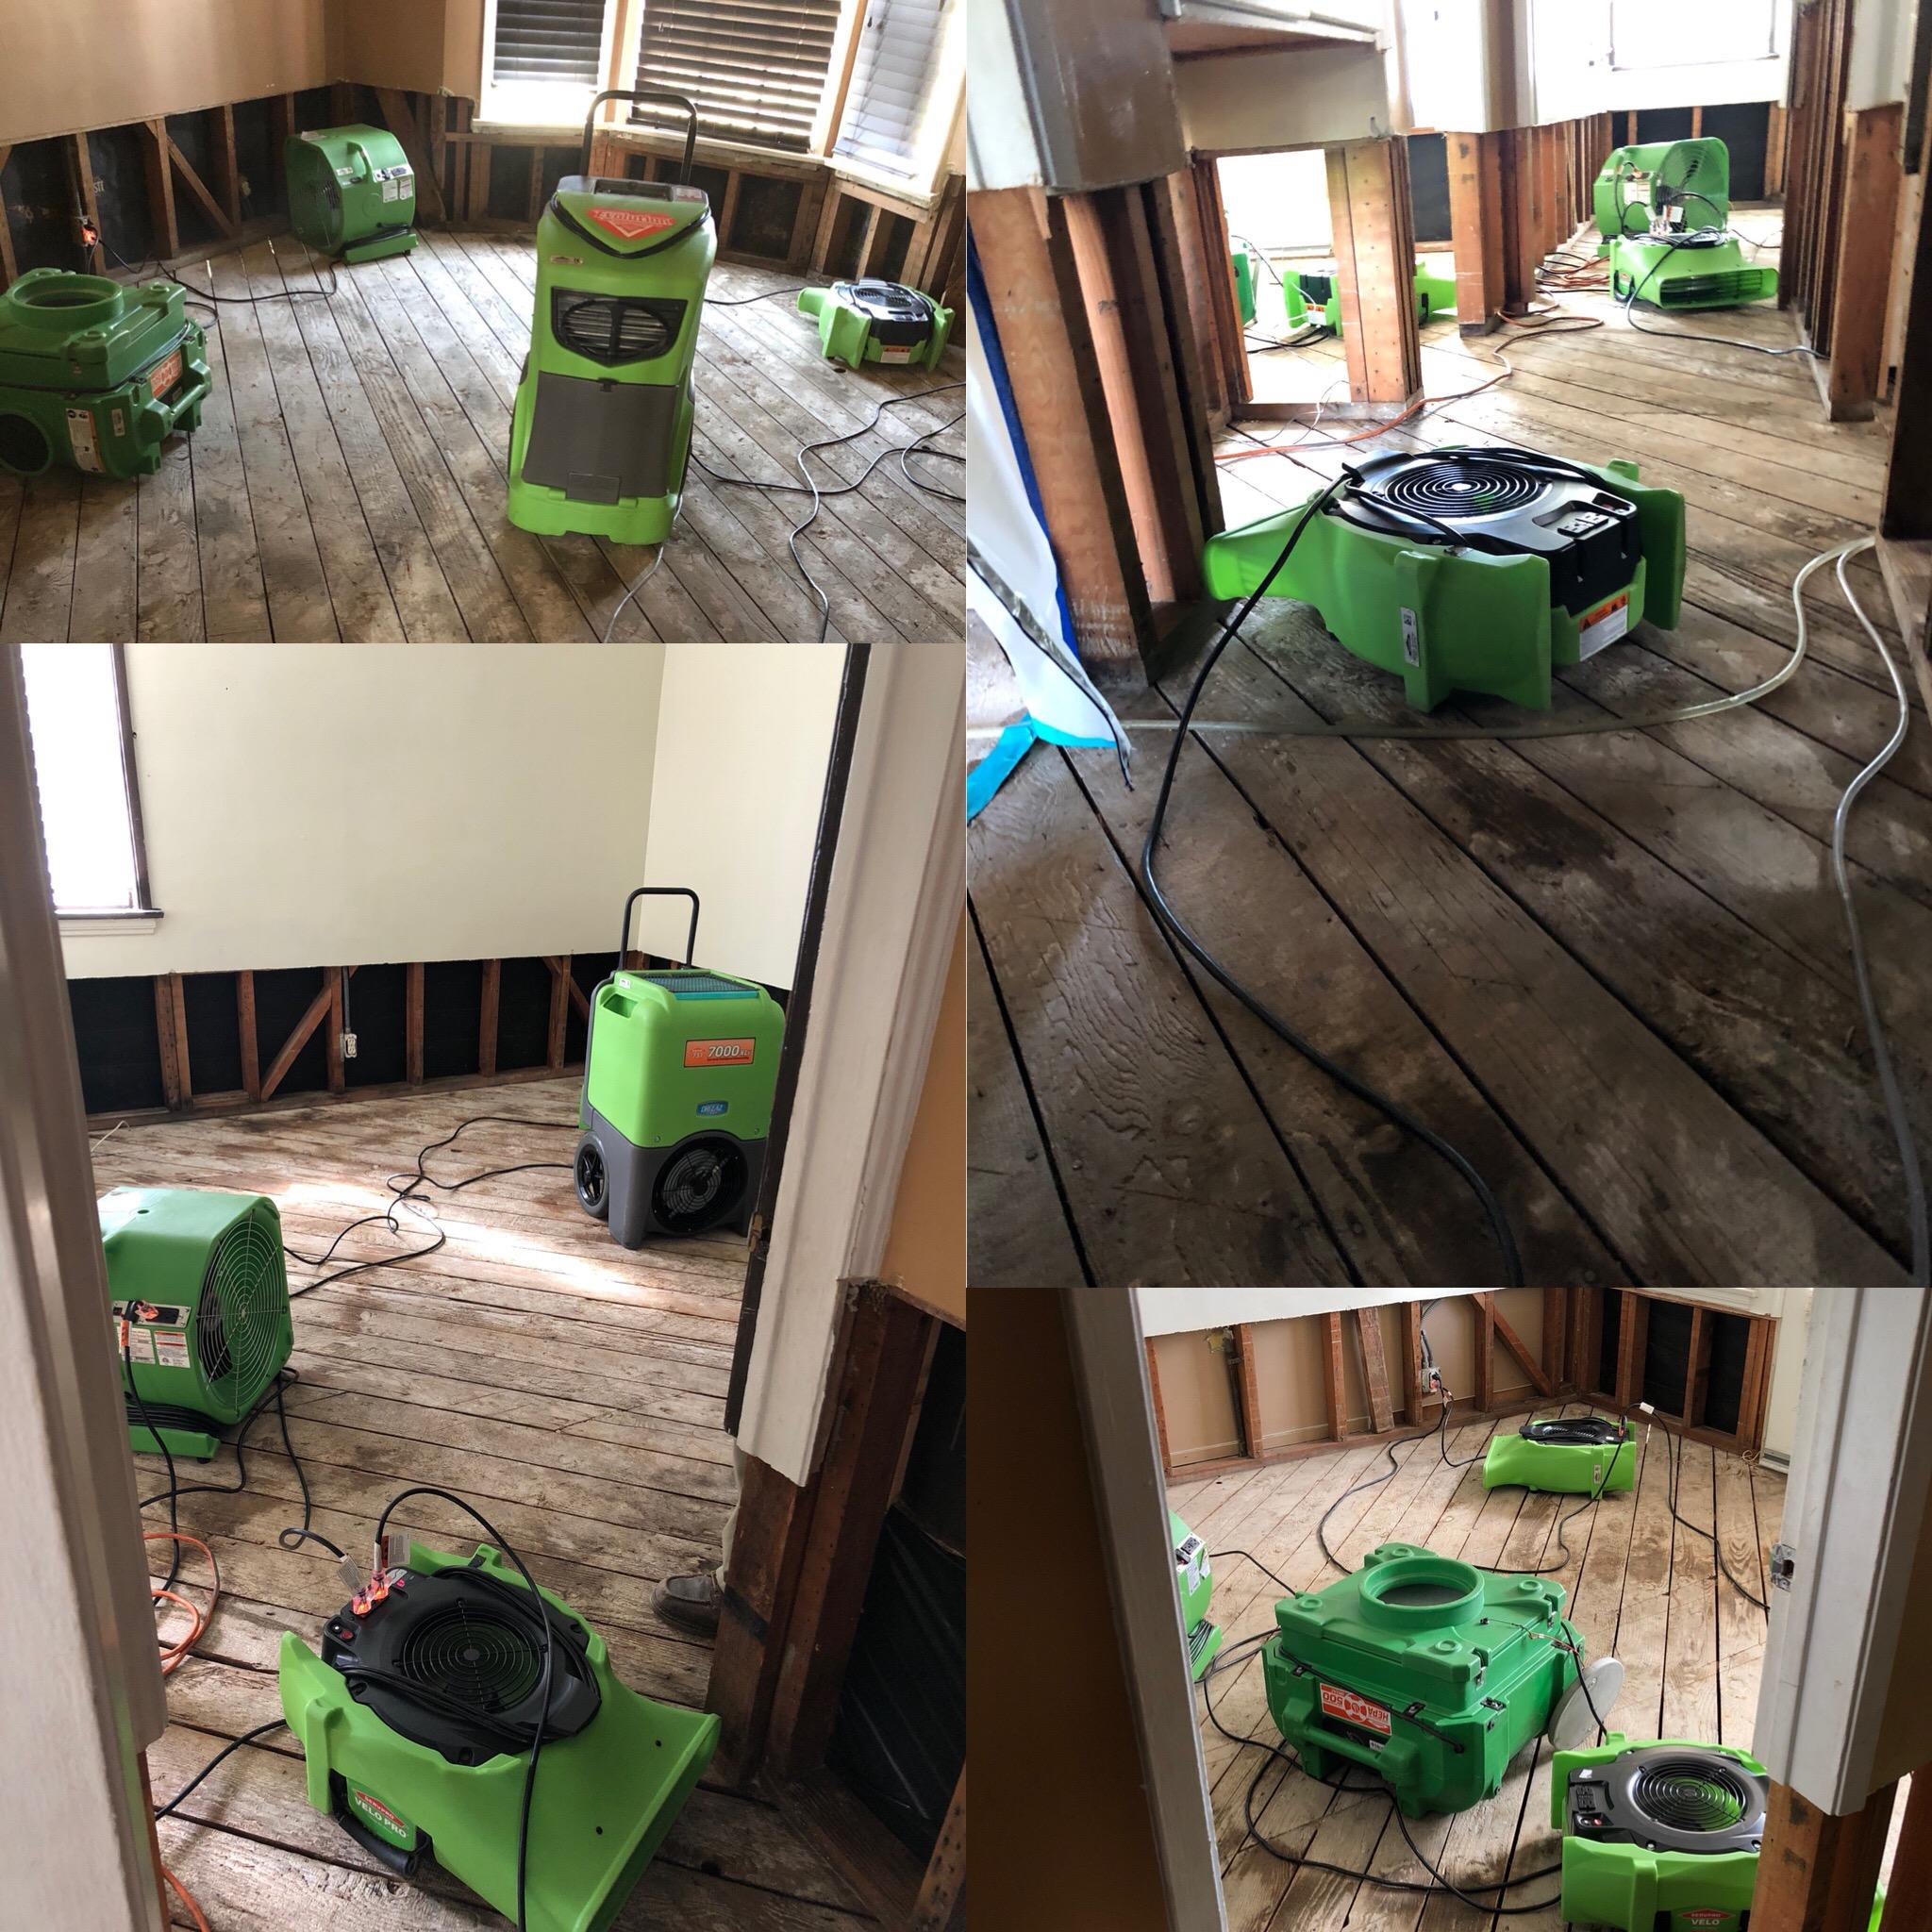 Our SERVPRO equipment is up and running during a large residential restoration!